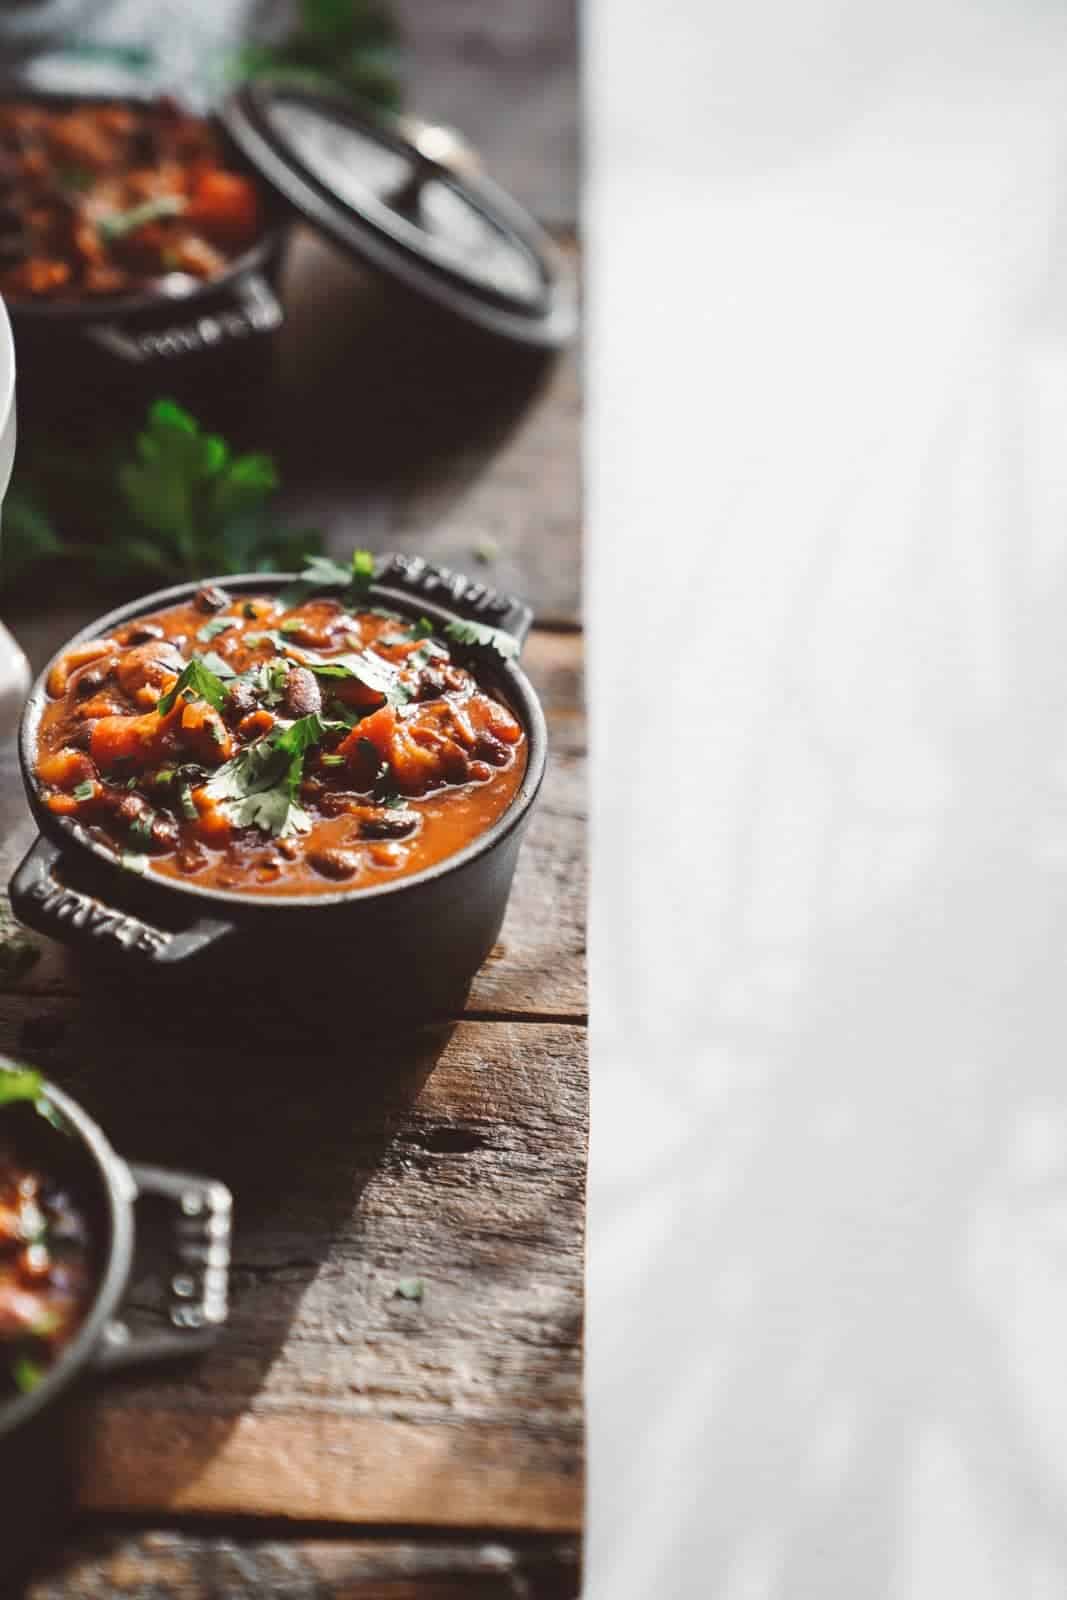 Big bowl of chili on the side of a wood table. One of the best recipes to make in September.